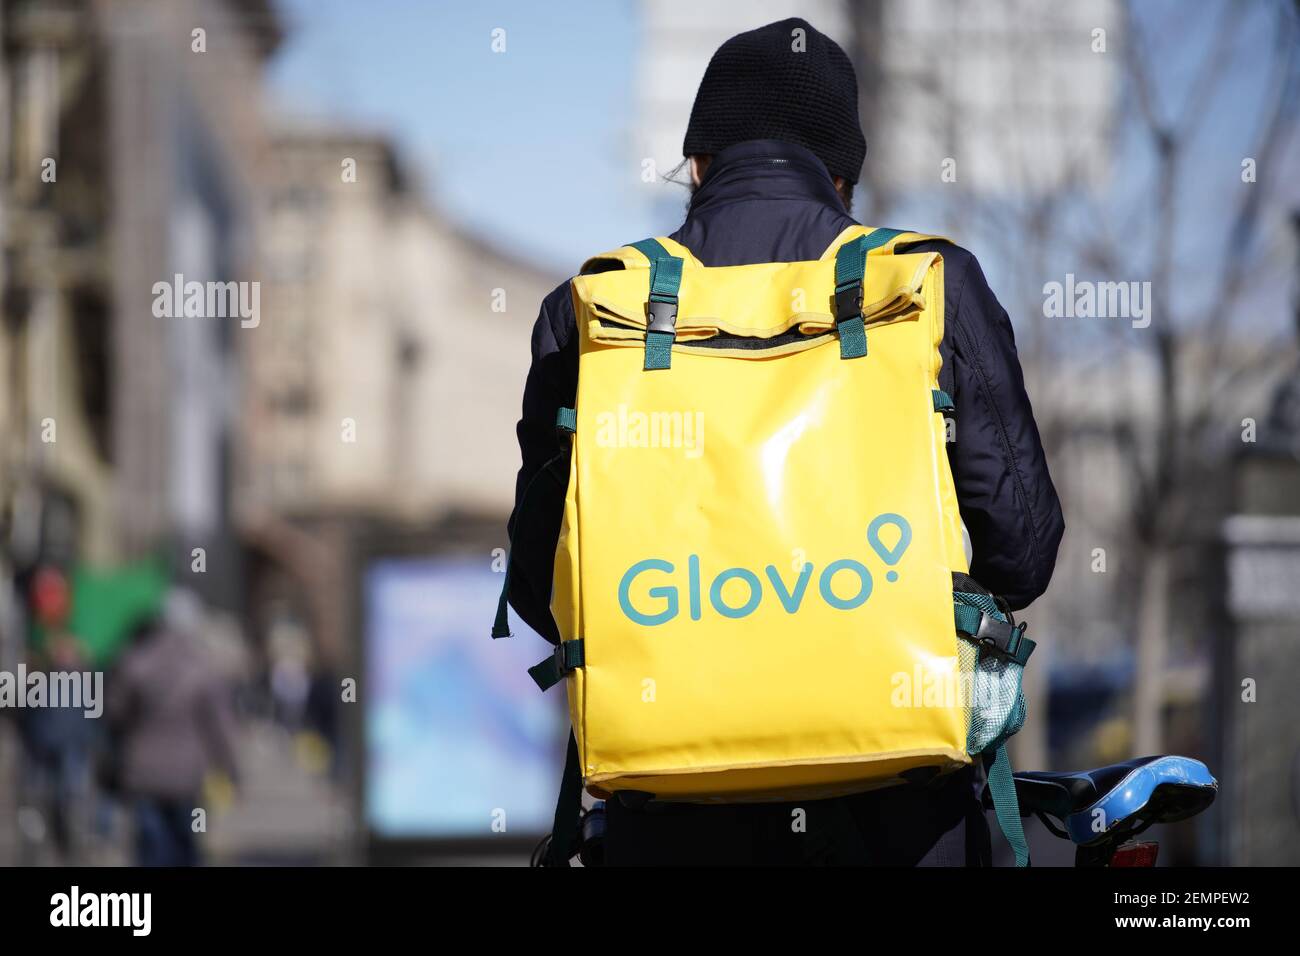 A courier for the Glovo app is seen in Kyiv, Ukraine on March 28, 2019.  Glovo is a Spanish startup from 2015 that promises to deliver anything  ordred by the customer through